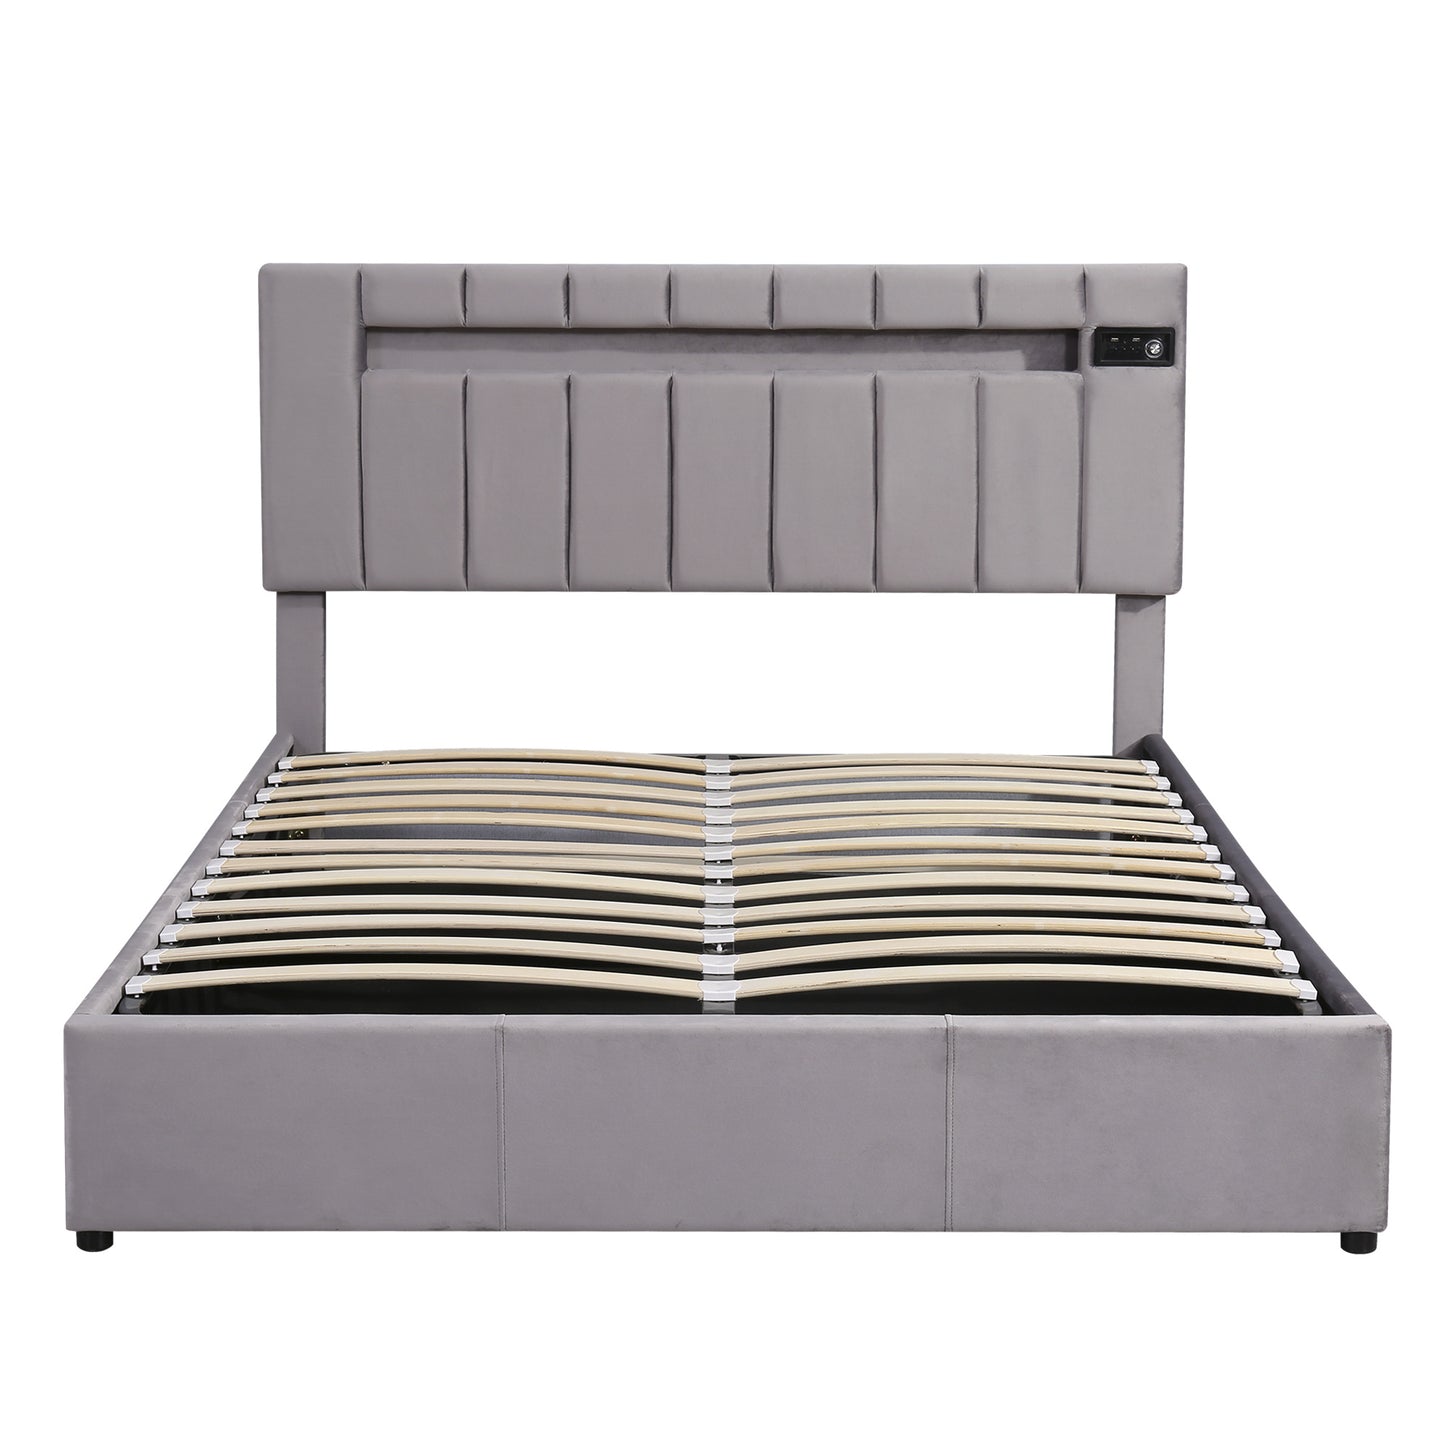 velvet upholstered hydraulic storage bed with led light, bluetooth player, and usb charging